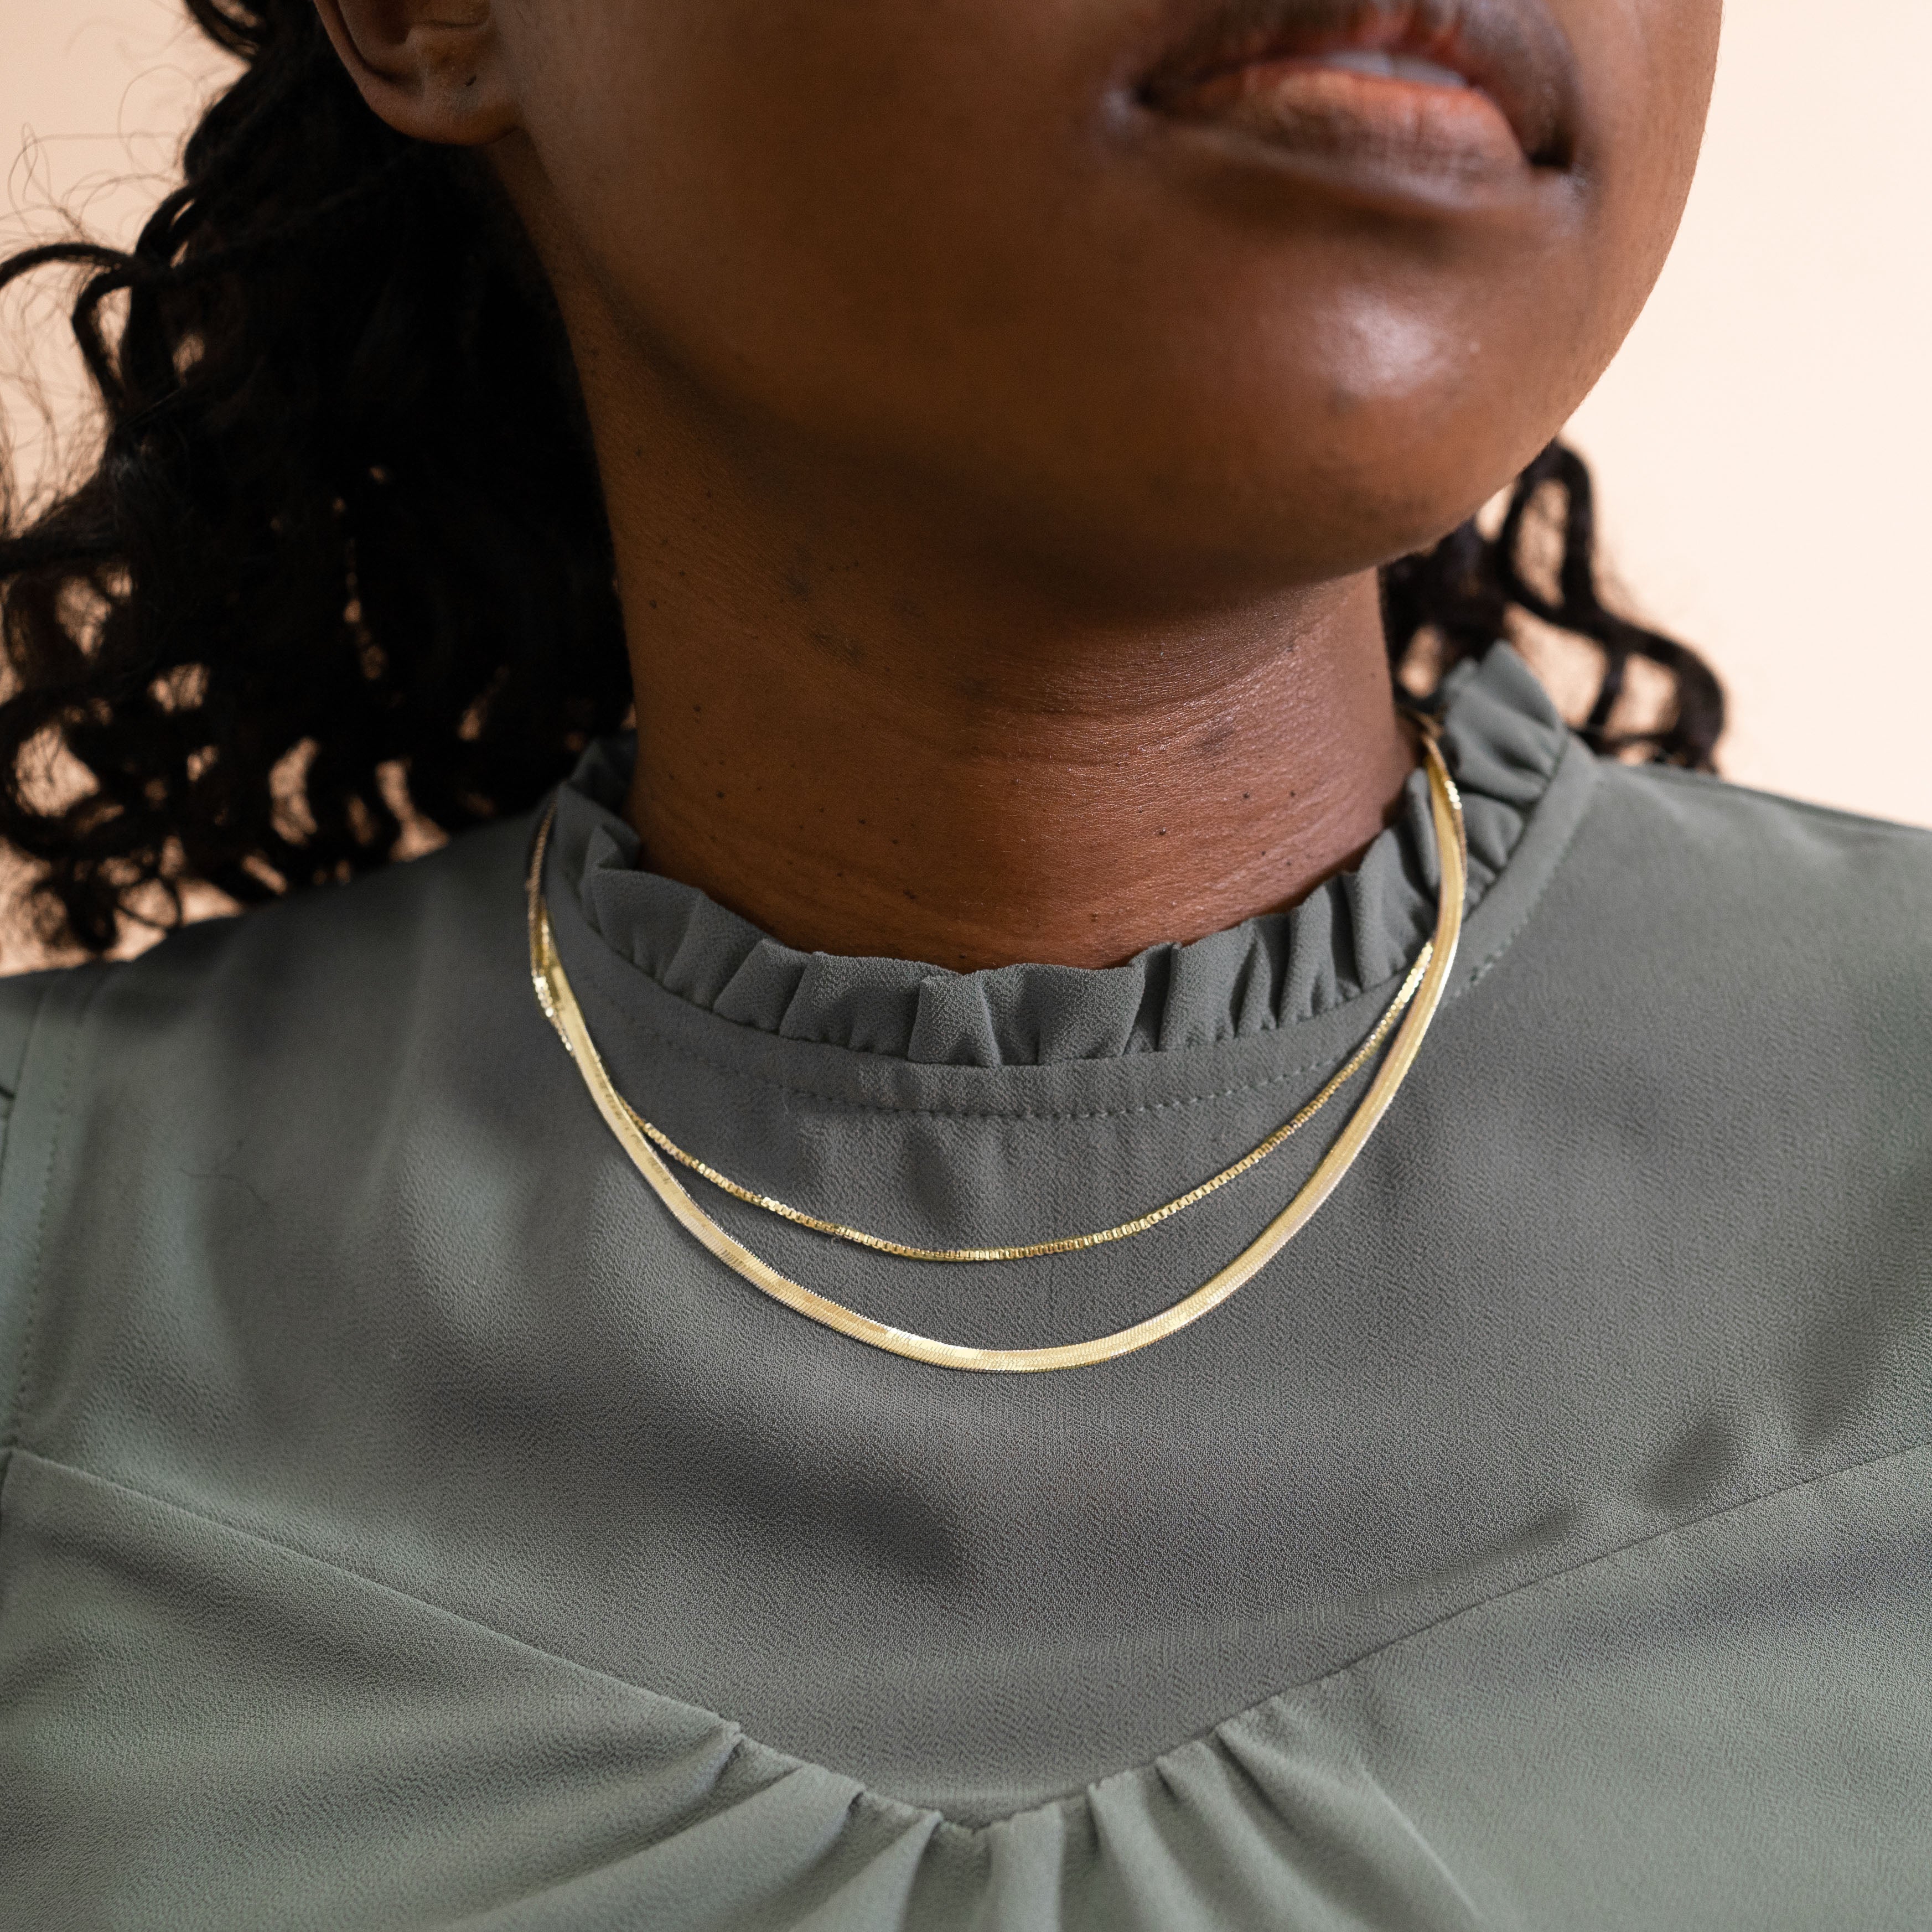 A model wearing the Double Layered Chain Necklace In Gold. This necklace features an adjustable design, and is crafted from 18K Gold Plated Vermeil on Sterling Silver with waterproof and non-tarnish properties. It is also available in Silver.